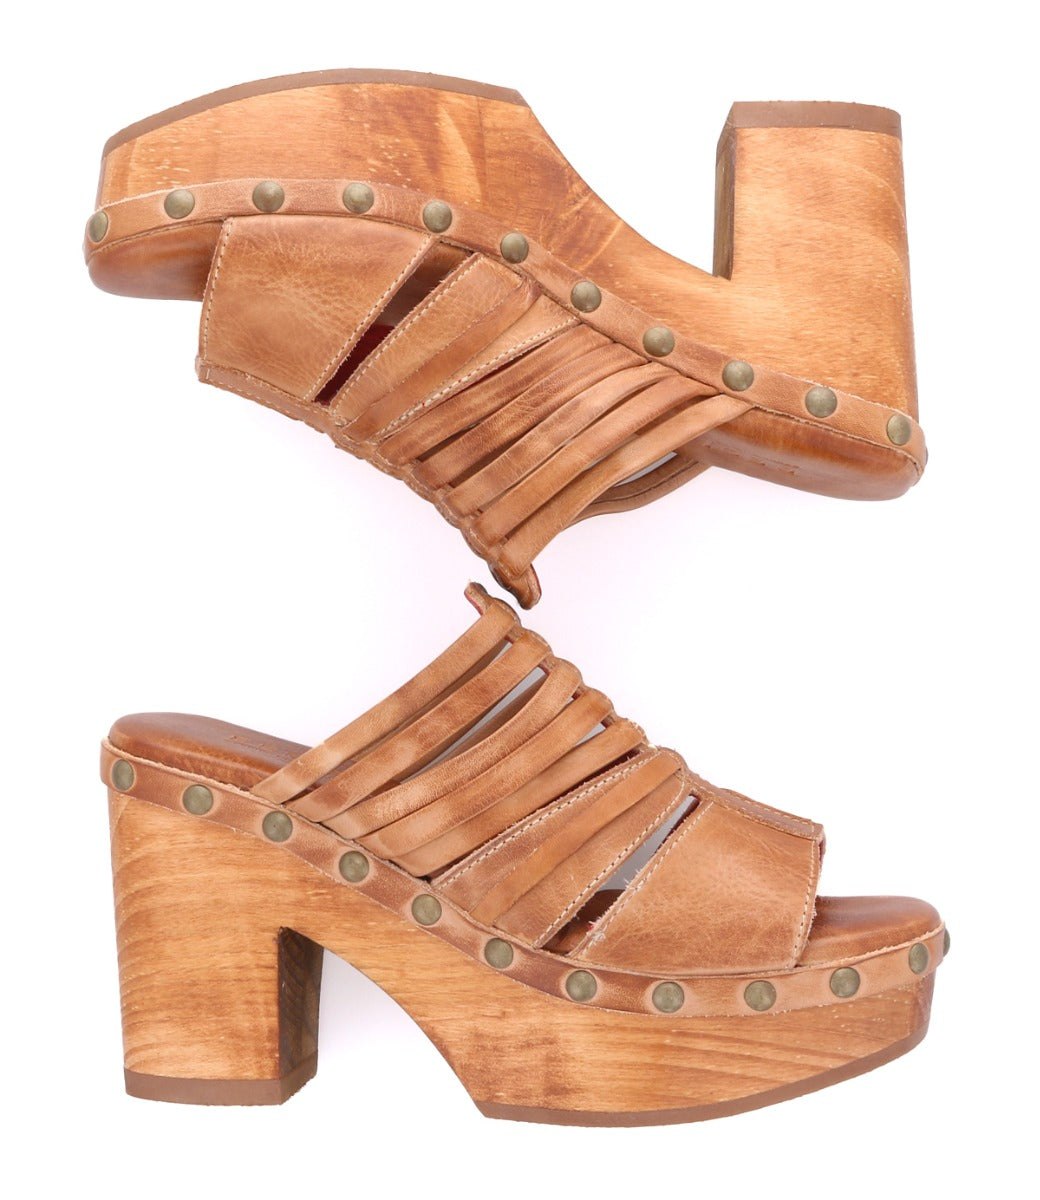 A pair of Shantel wooden sandals with straps and studs by Bed Stu.